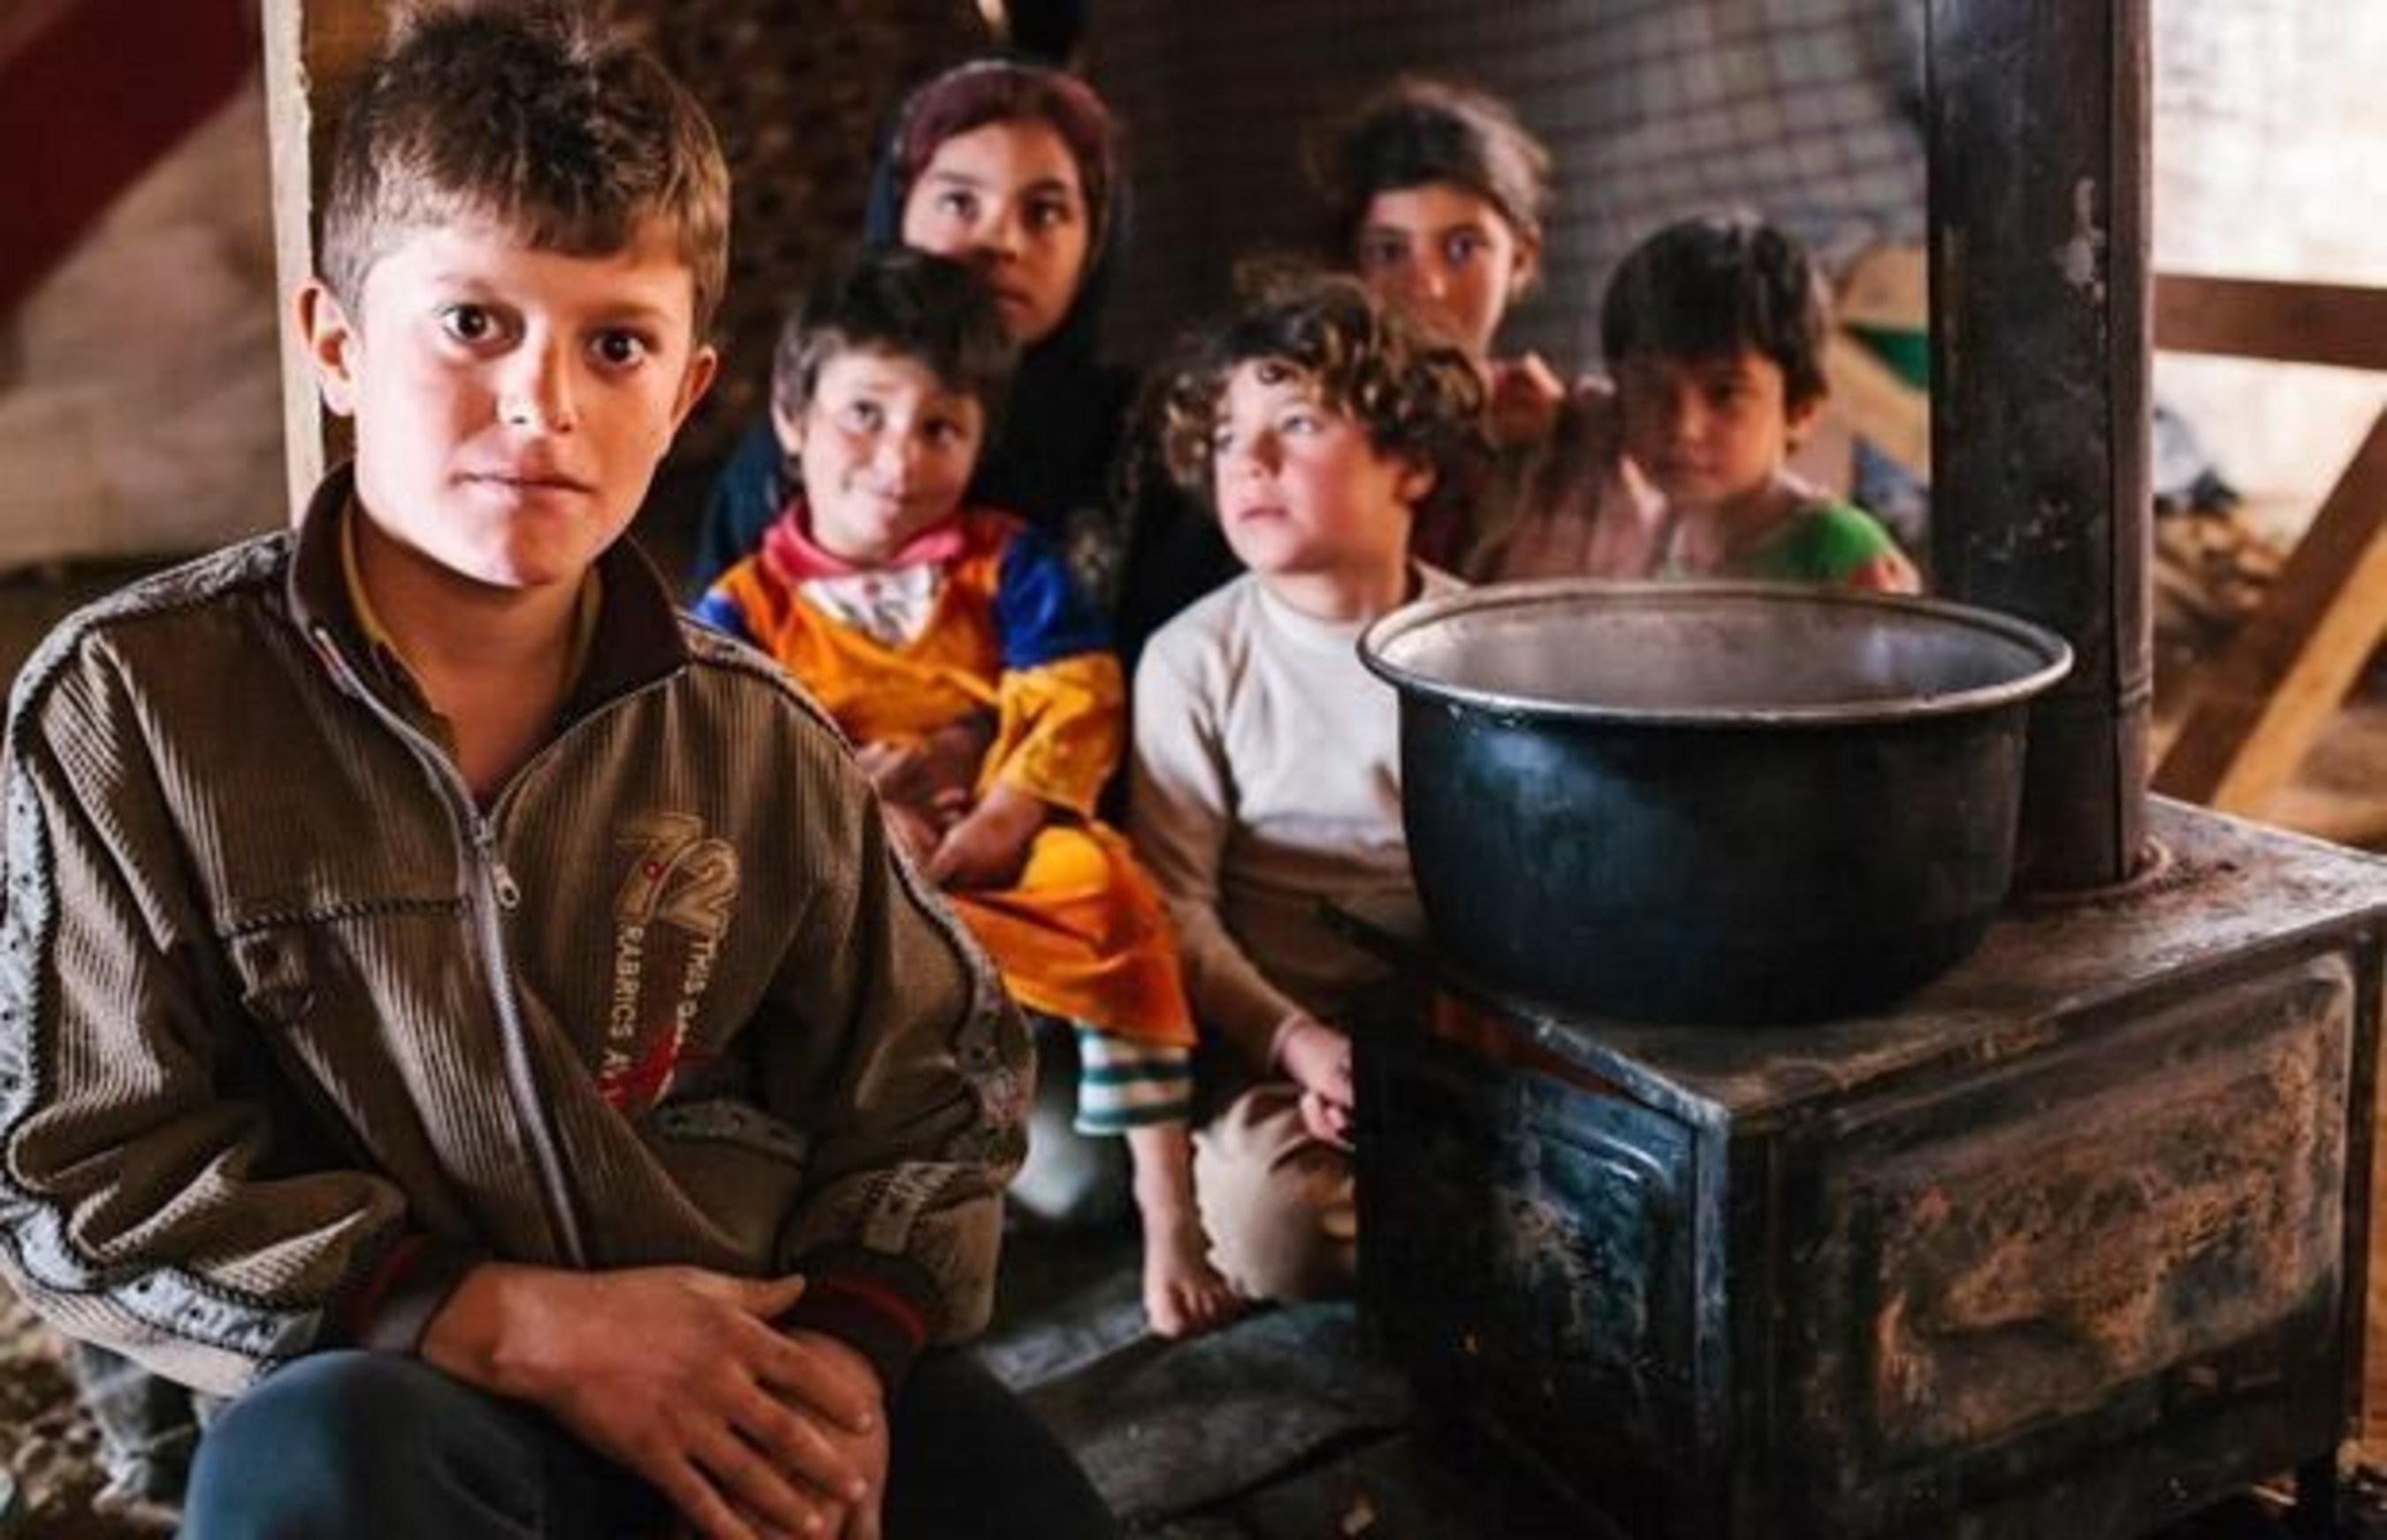 Syria refugees Adel and his siblings try to keep warm by the fire inside their makeshift home in the Bekaa Valley, Lebanon. ((c)2015 World Vision)